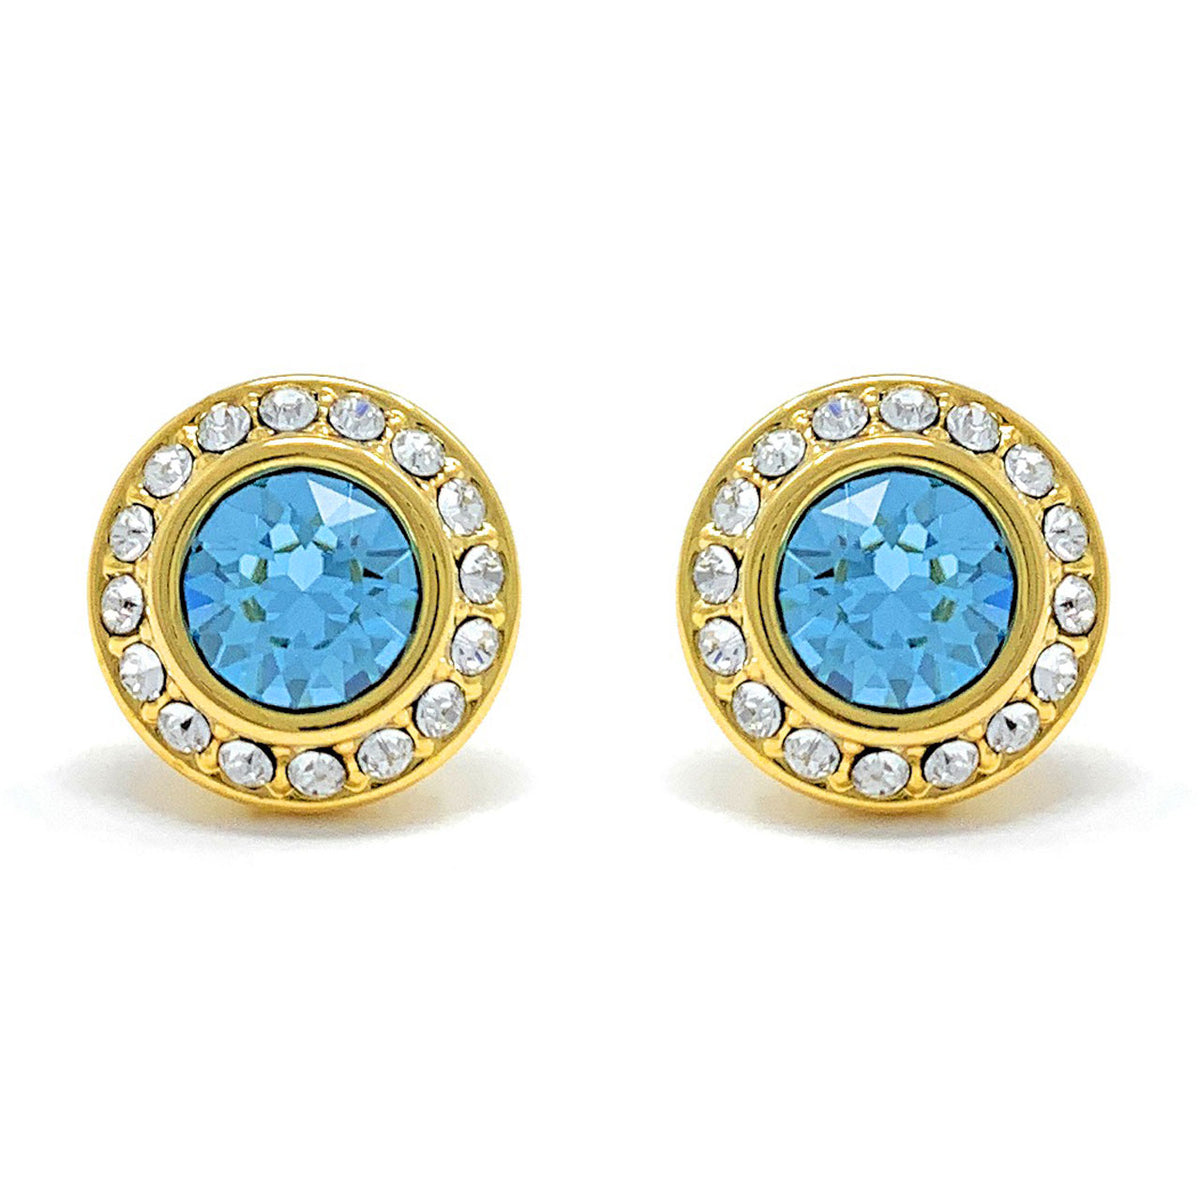 Halo Pave Stud Earrings with Blue Aquamarine Round Crystals from Swarovski Gold Plated - Ed Heart